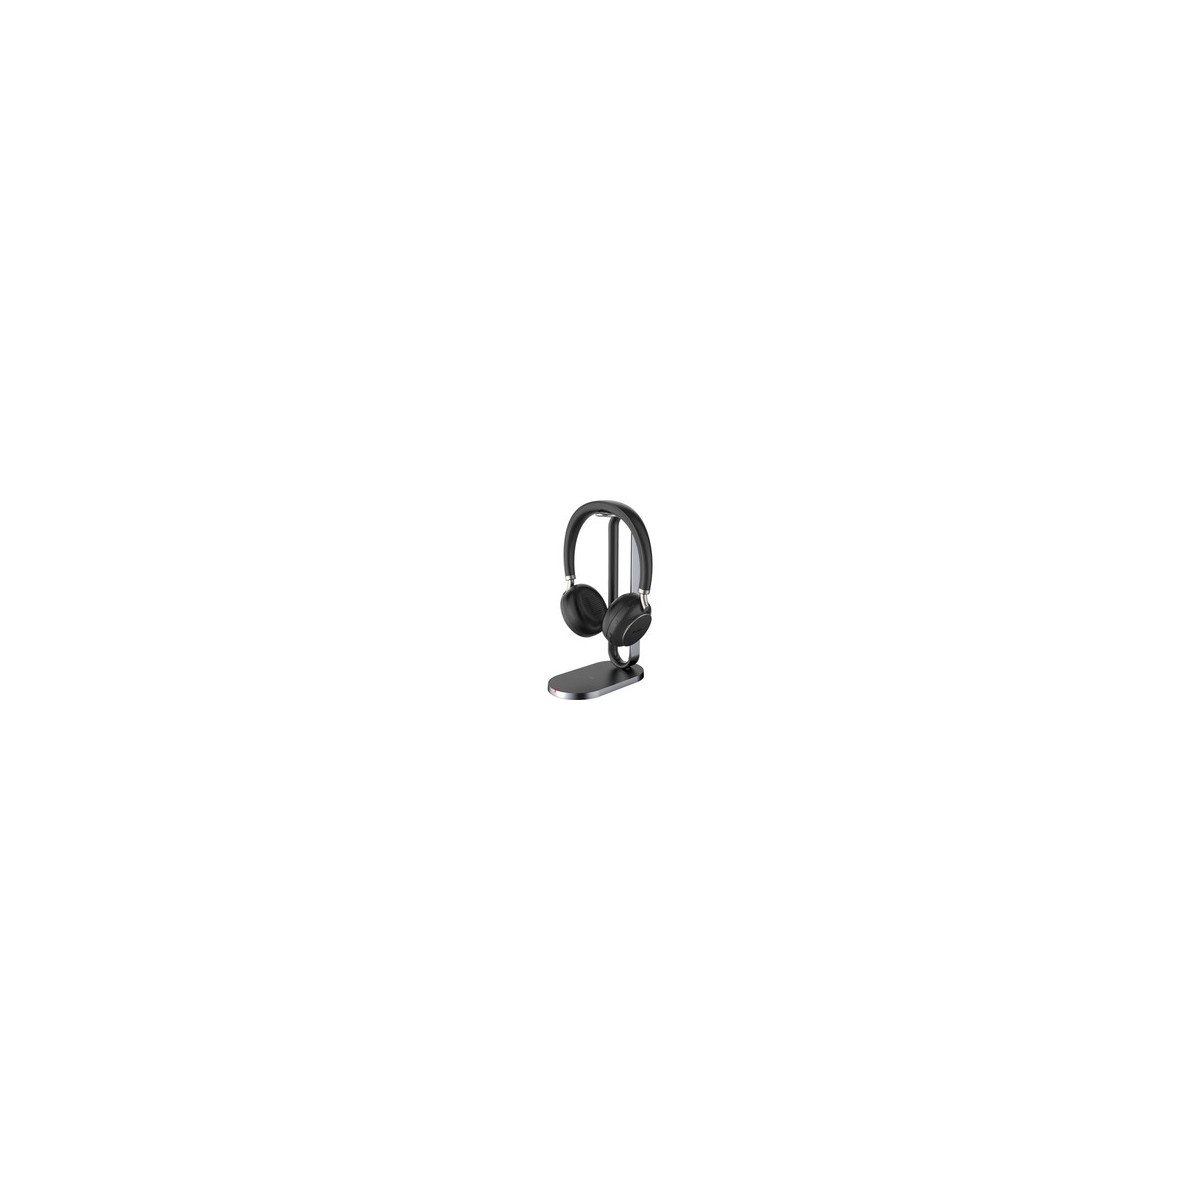 Yealink Bluetooth Headset - BH76 with Charging Stand UC Black USB-C - Headset - 5.1